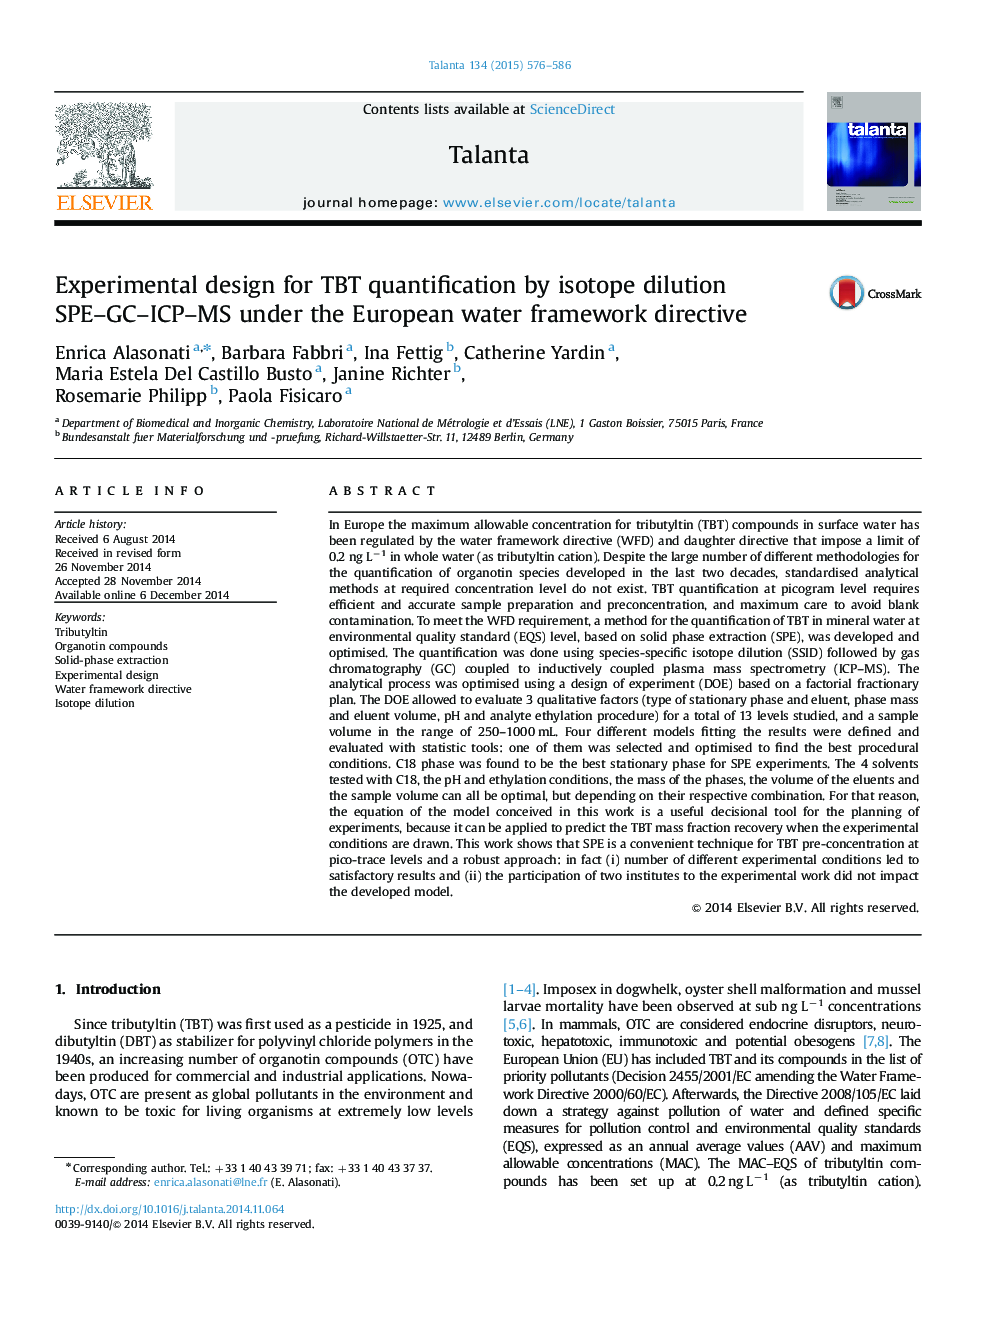 Experimental design for TBT quantification by isotope dilution SPE–GC–ICP–MS under the European water framework directive